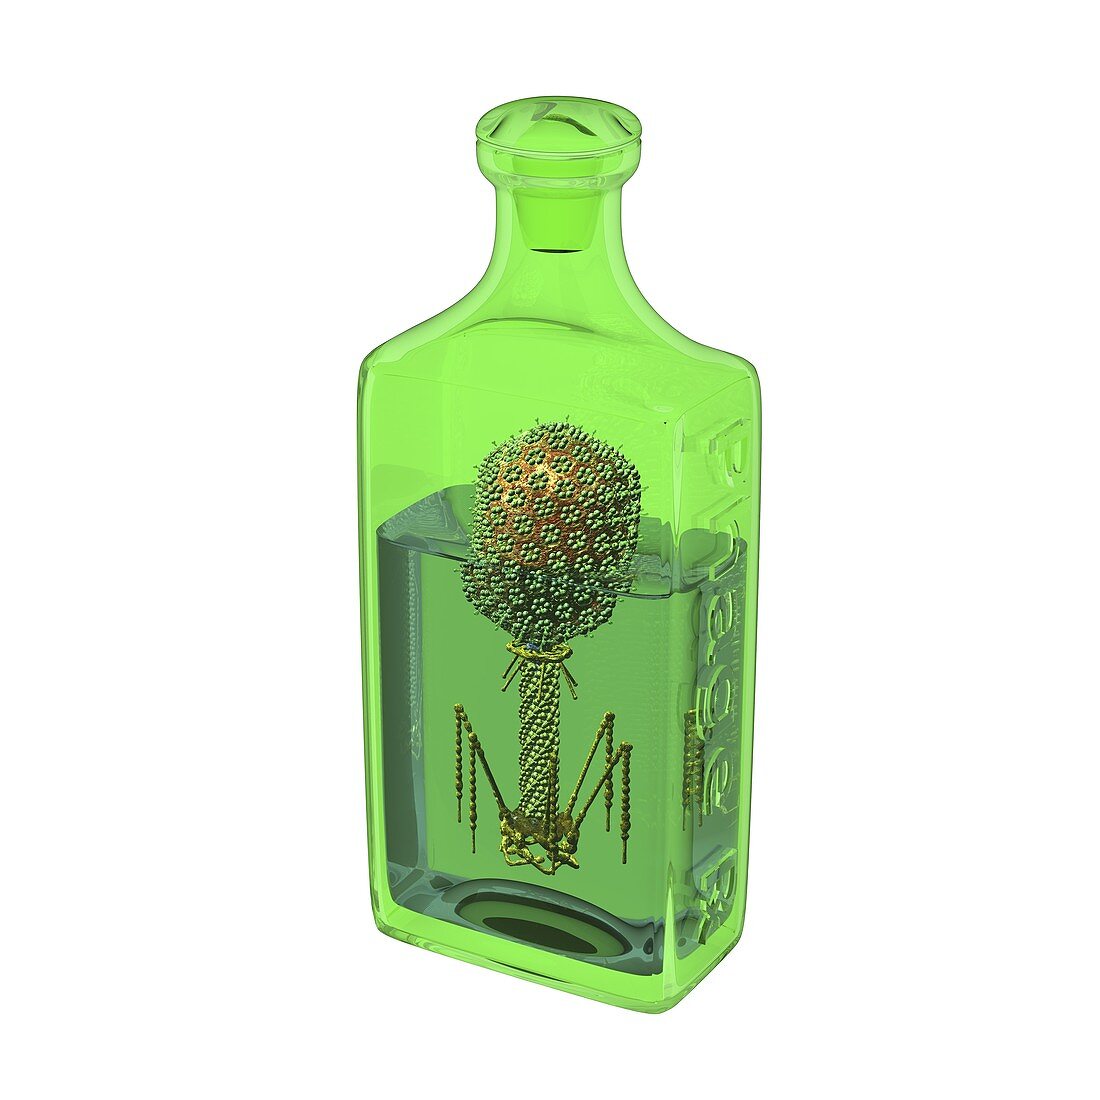 Phage therapy bottle,conceptual image